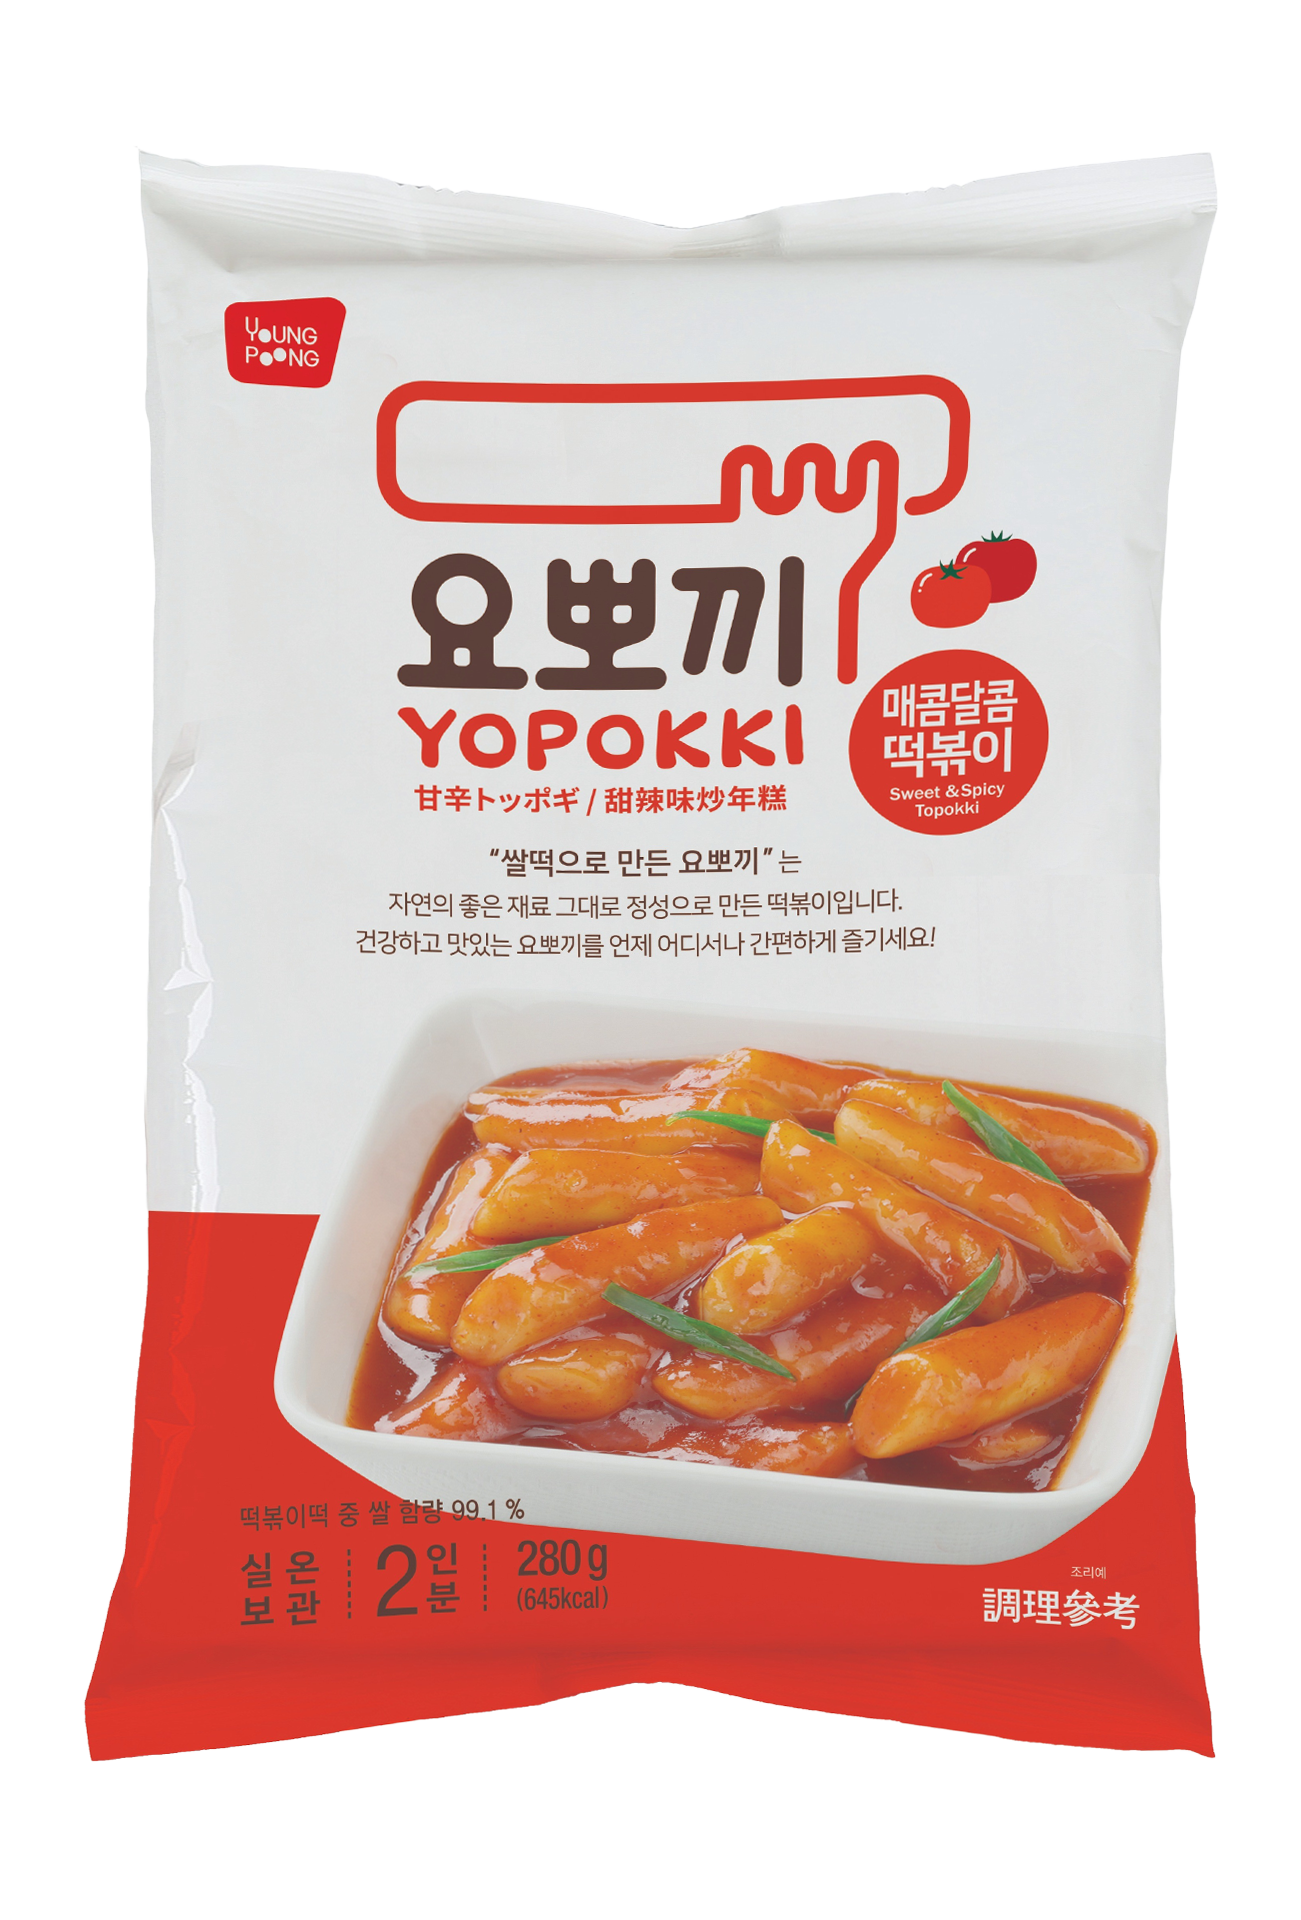 Topokki Pouch (for two) Sweet & Spicy by YOPOKKI